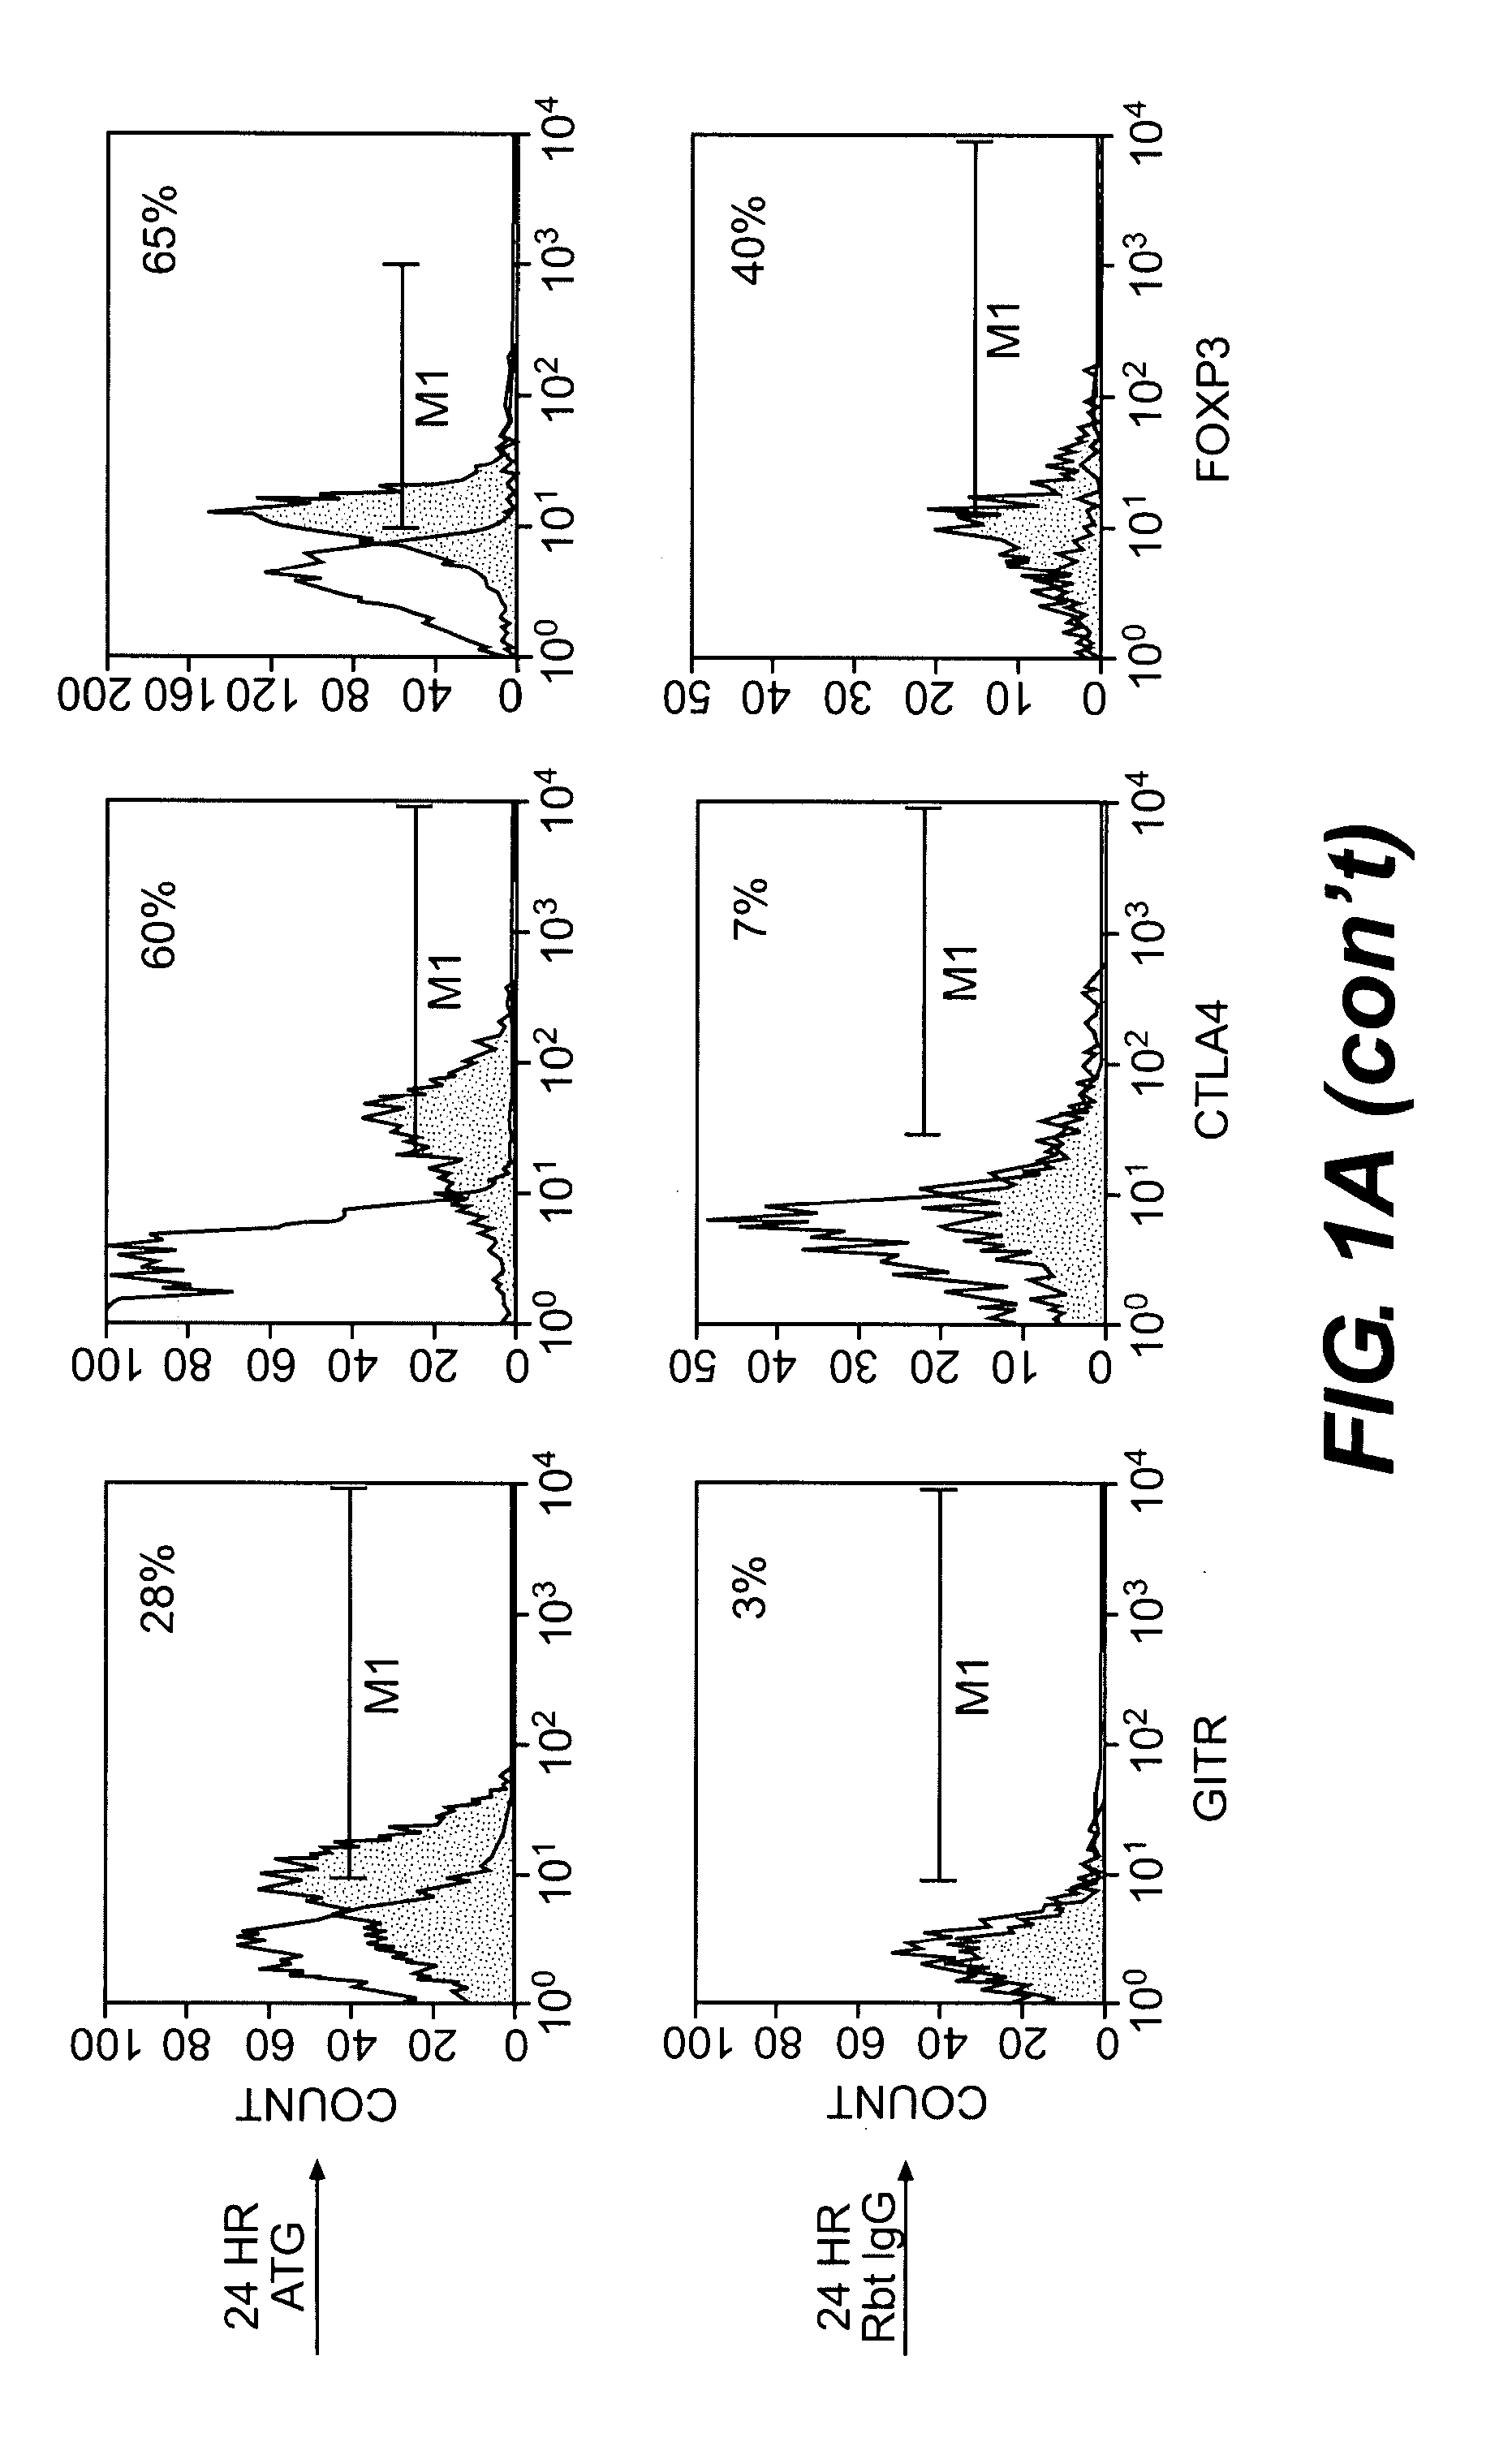 Methods of Using Anti-Thymocyte Globulin and Related Agents